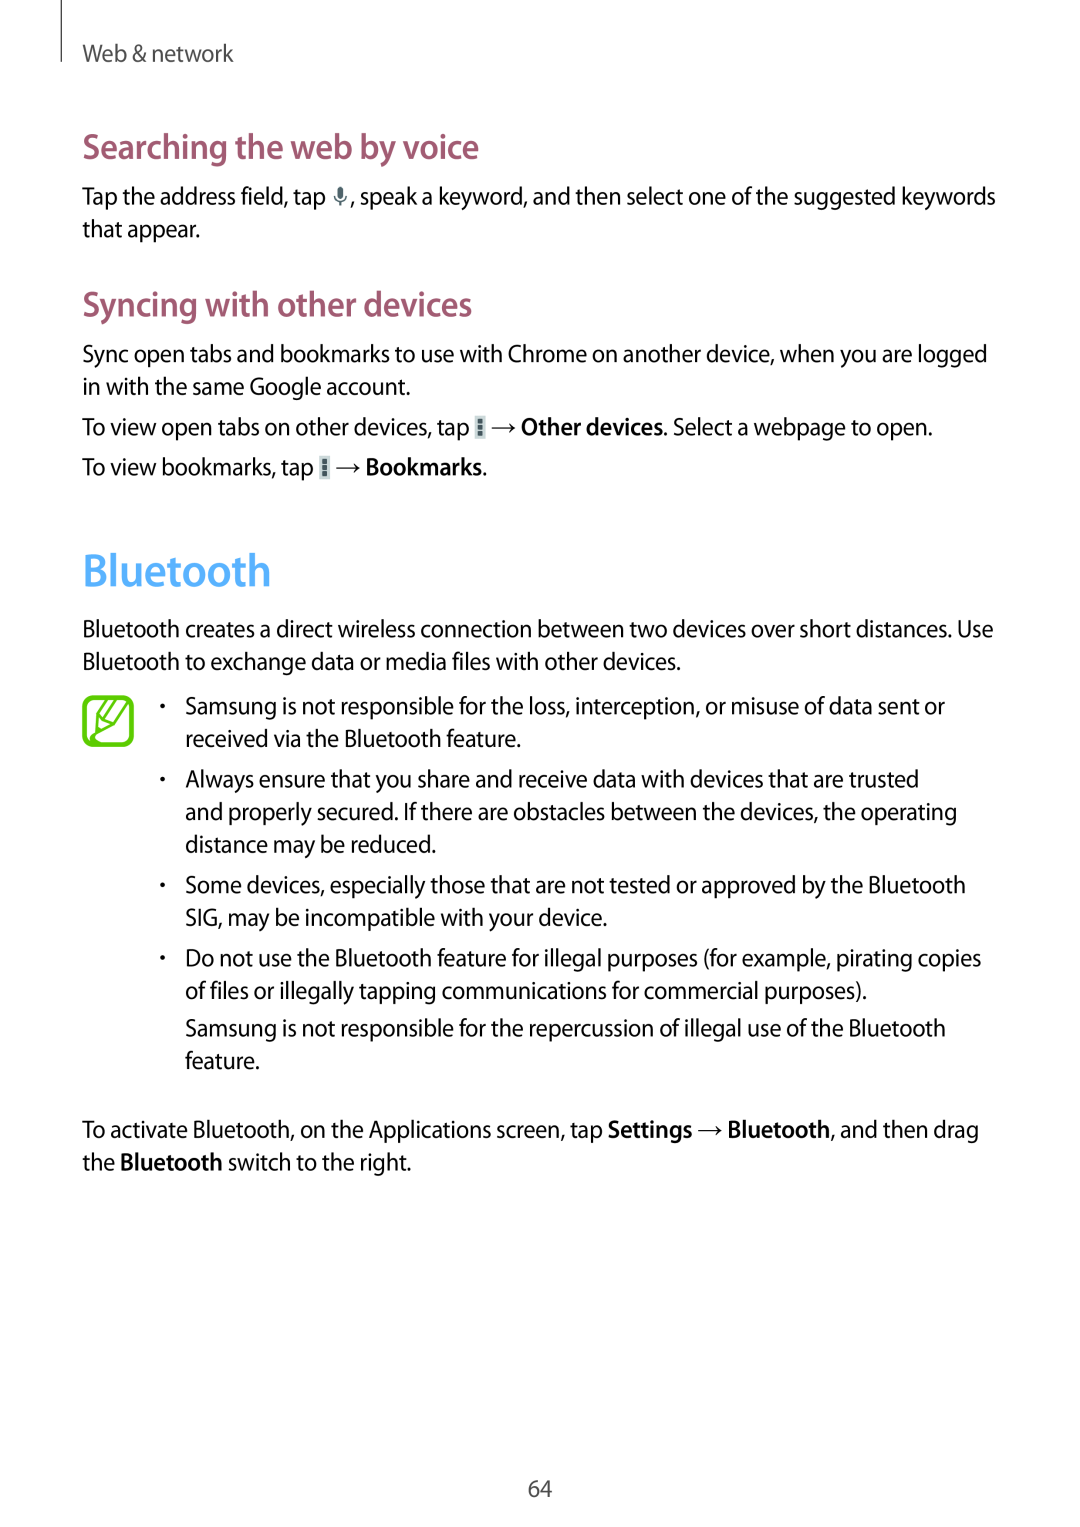 Samsung GT-N5100 user manual Bluetooth, Syncing with other devices, Searching the web by voice, Web & network 